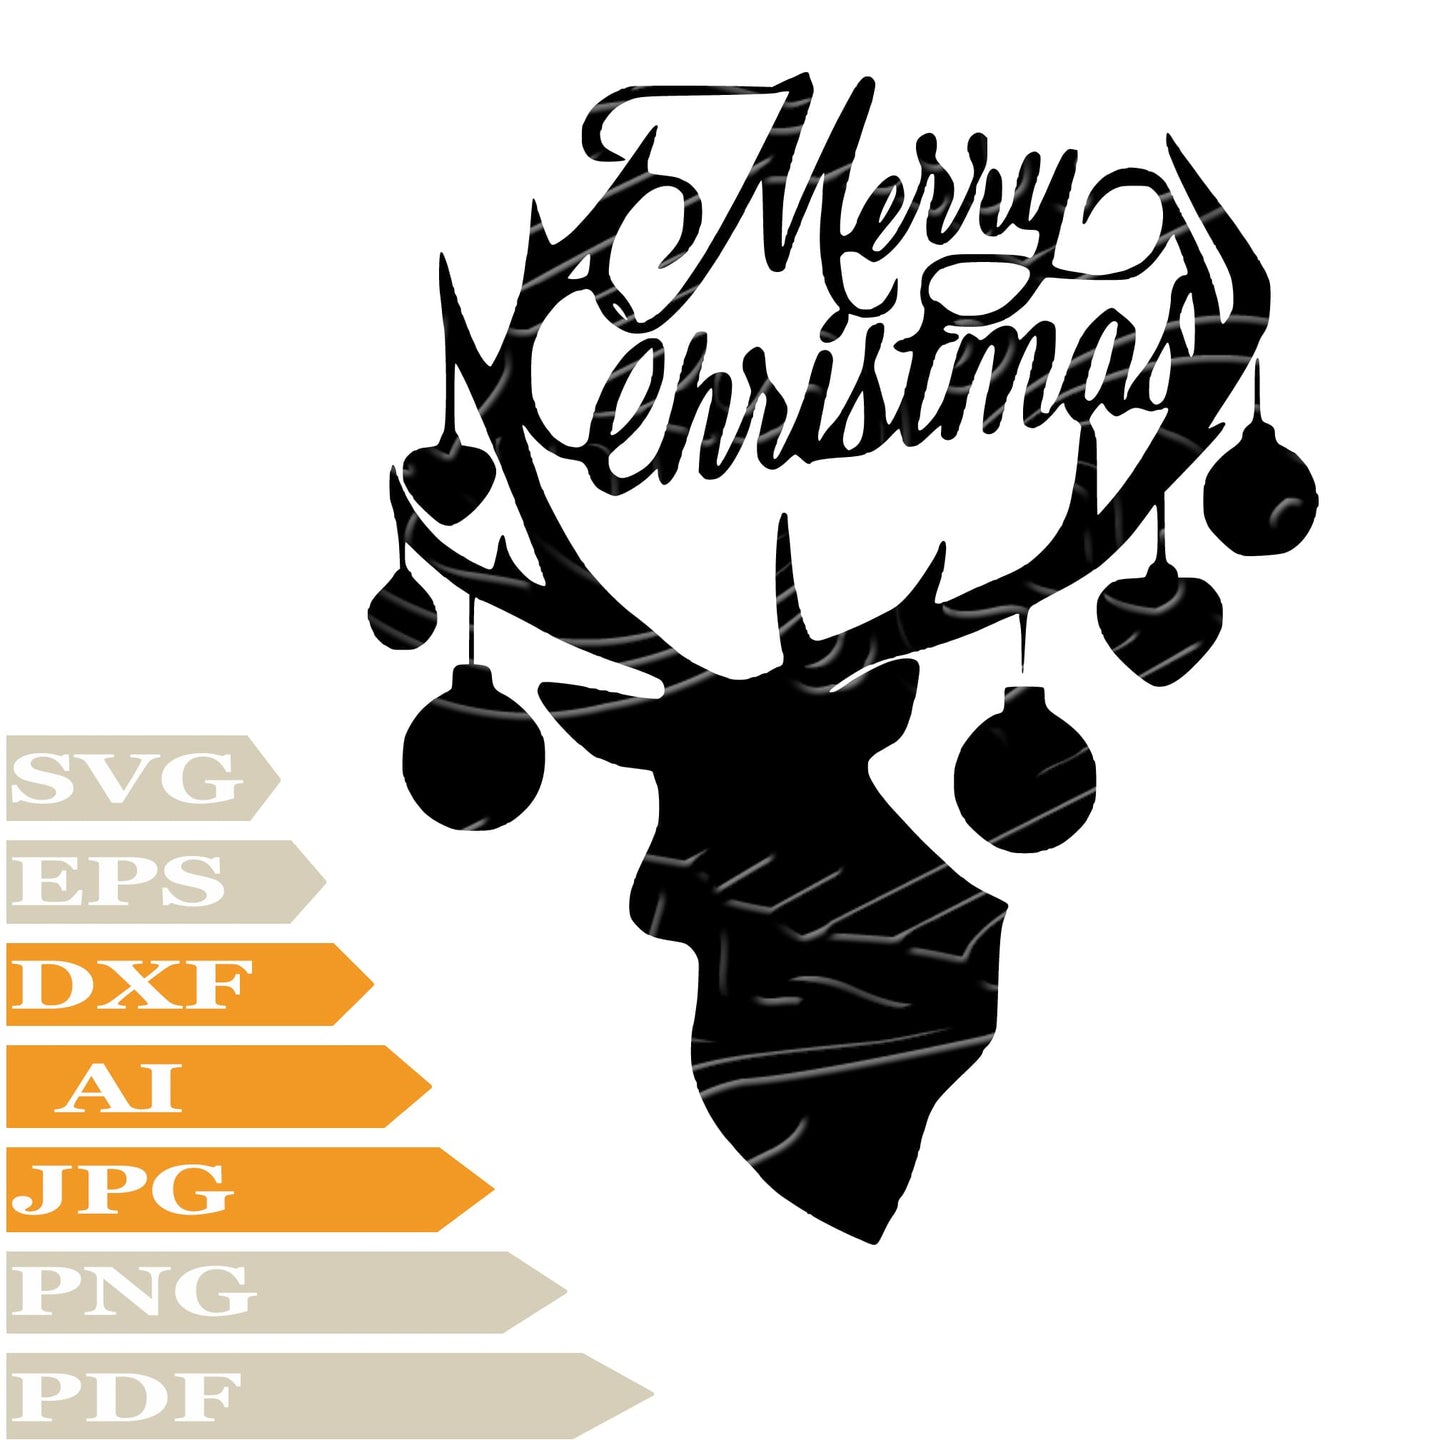 Deer, Merry Christmas Svg File, Image Cut, Png, For Tattoo, Silhouette, Digital Vector Download, Cut File, Clipart, For Cricut